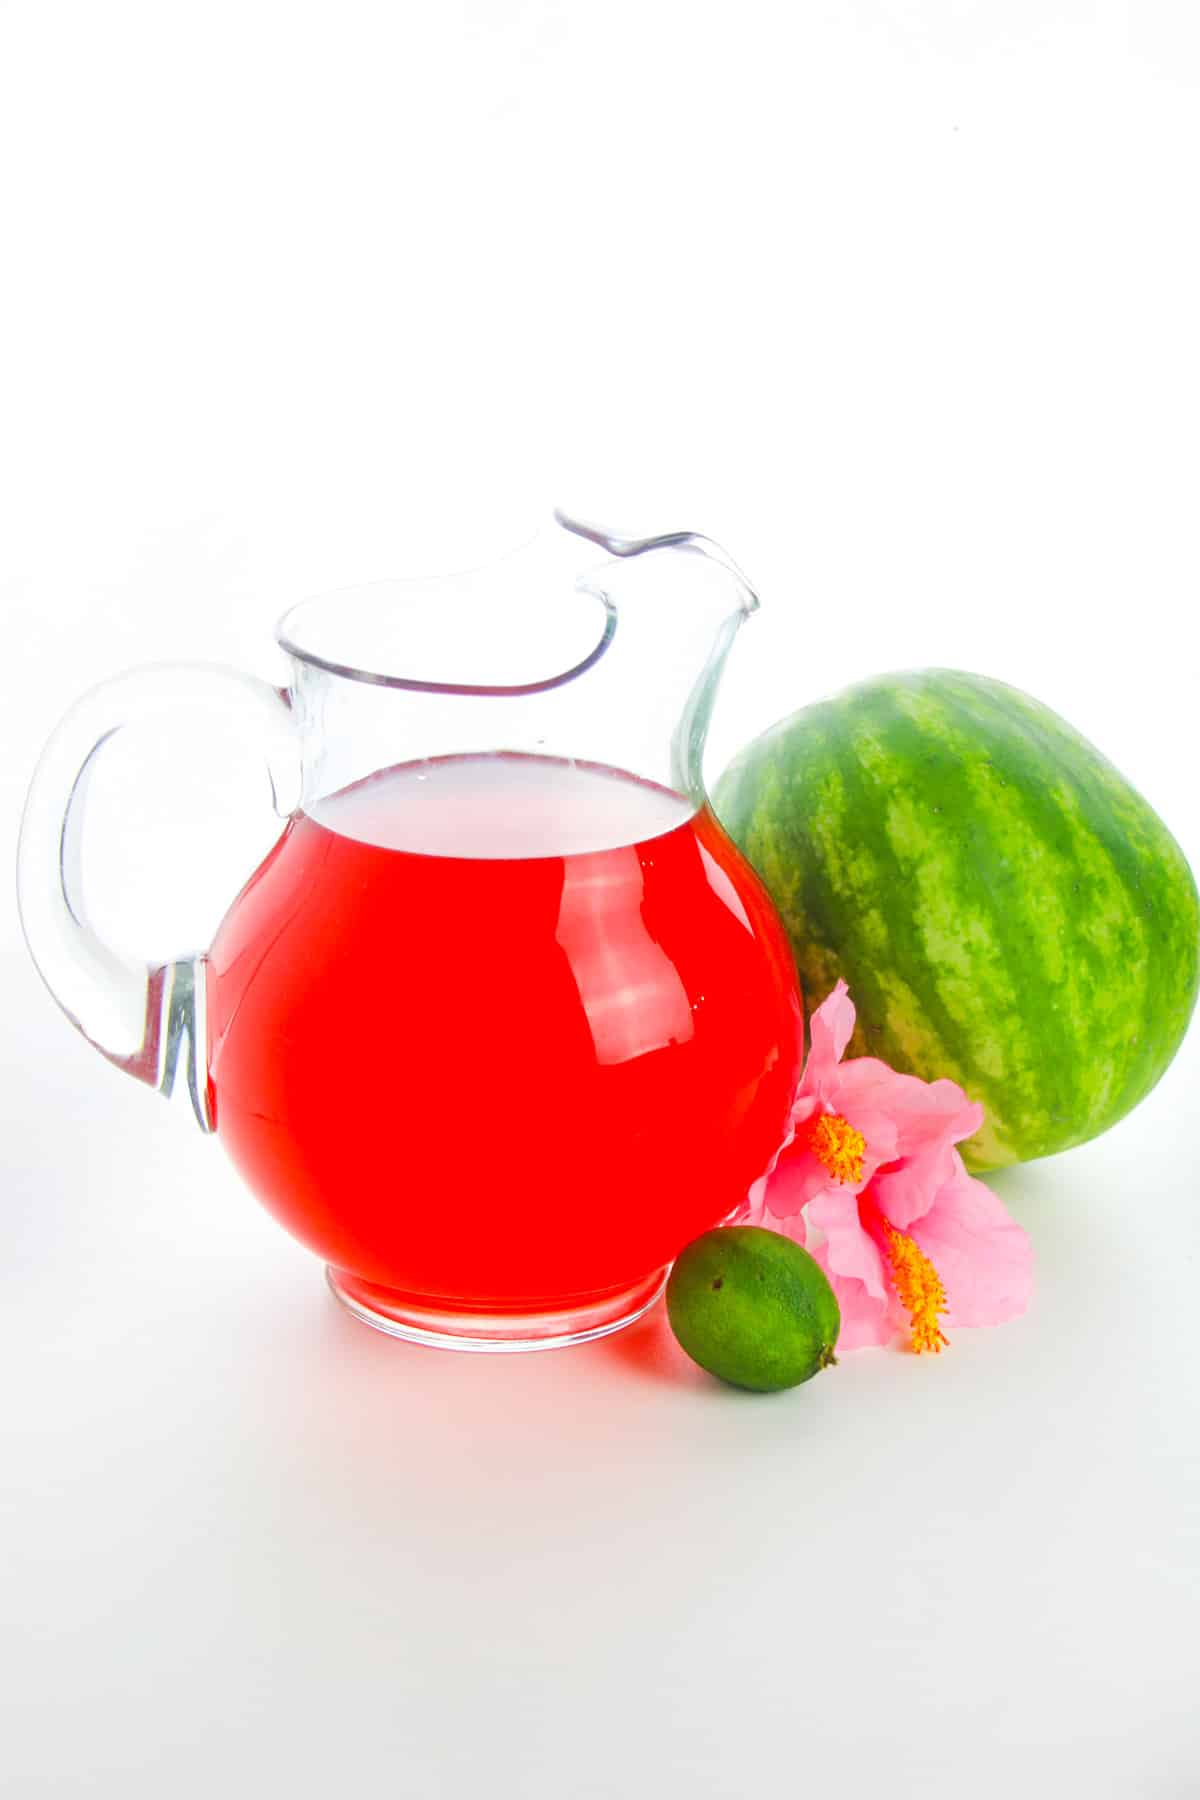 Watermelon drink in large glass pitcher with a small watermelon, a lime, and a pink flower next to it.